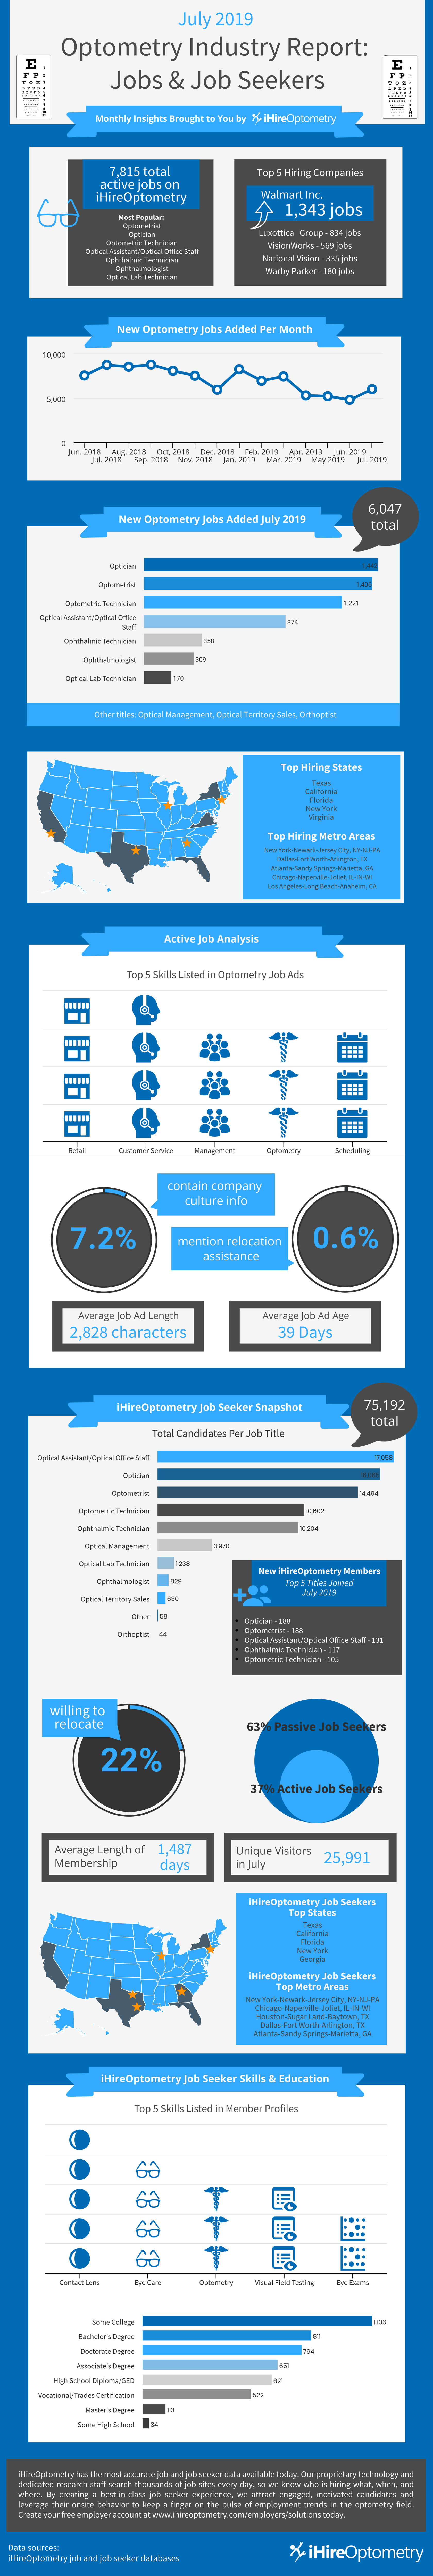 iHireOptometry’s eye care industry overview for July 2019. Infographic.